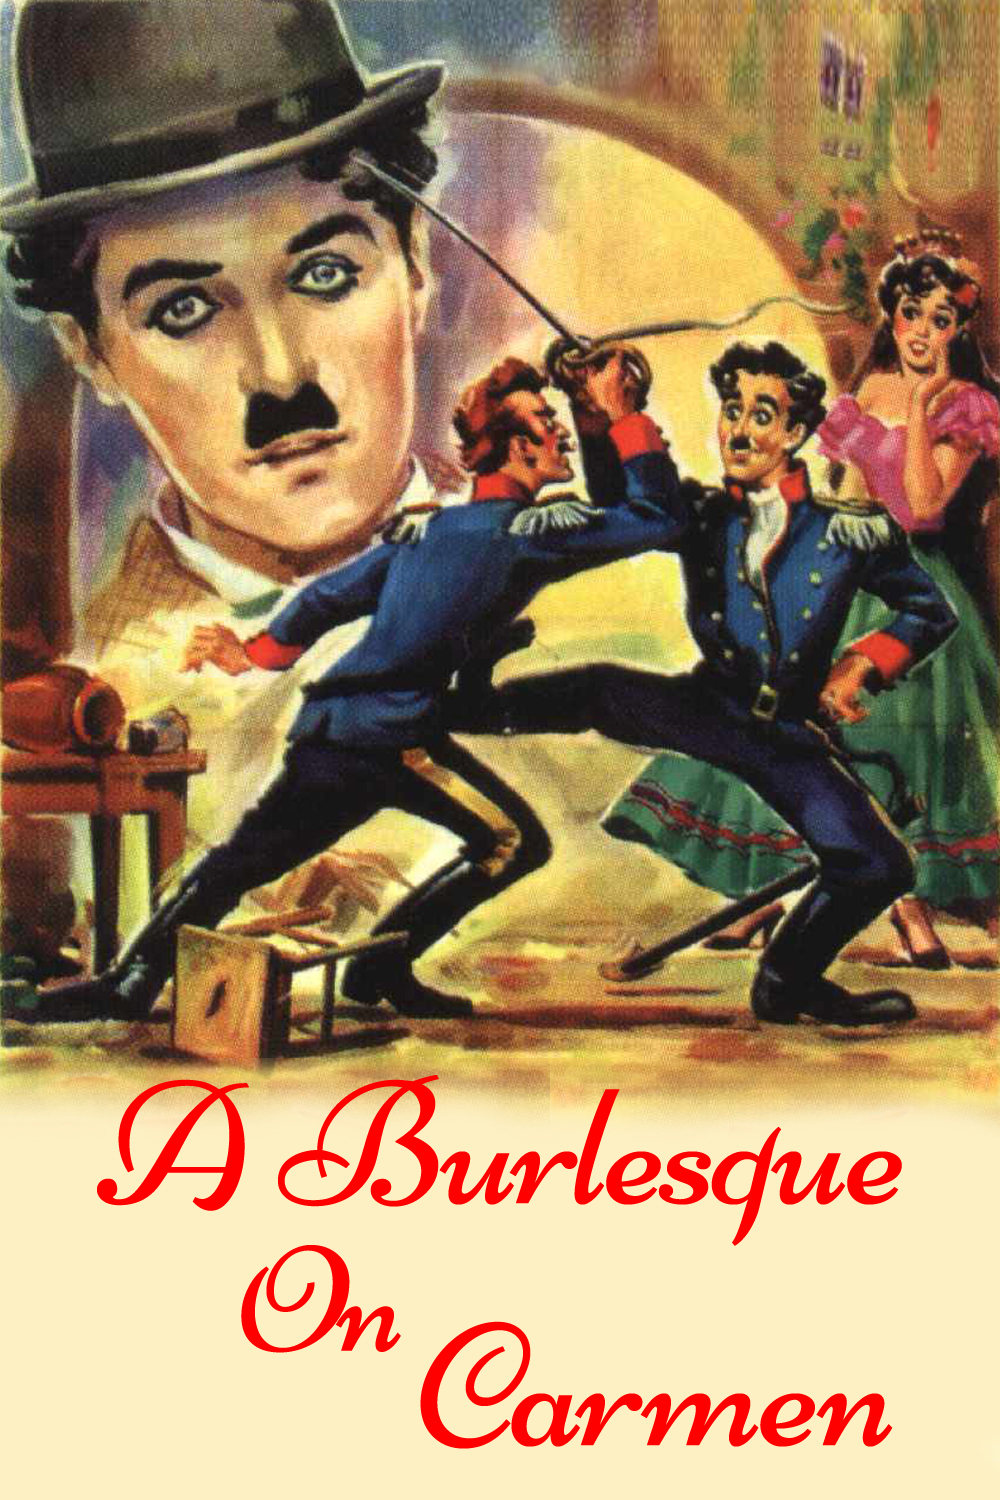 Poster for the movie "Burlesque on Carmen"